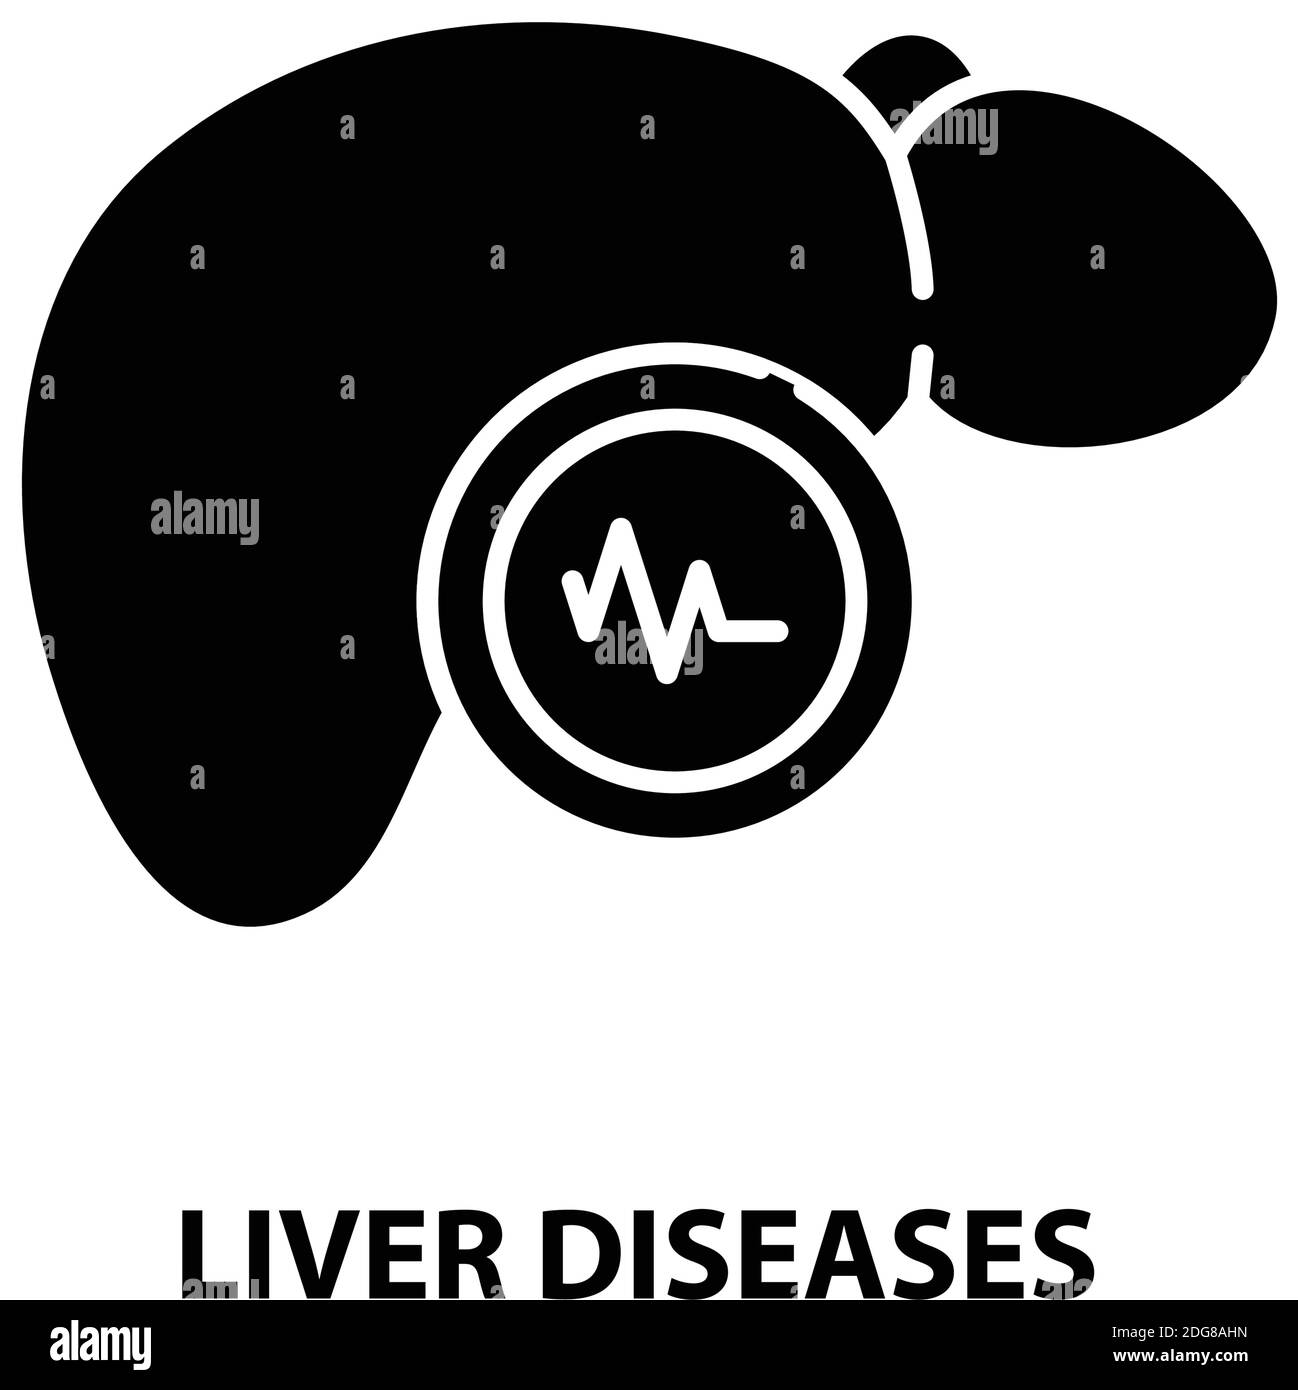 liver diseases icon, black vector sign with editable strokes, concept illustration Stock Vector